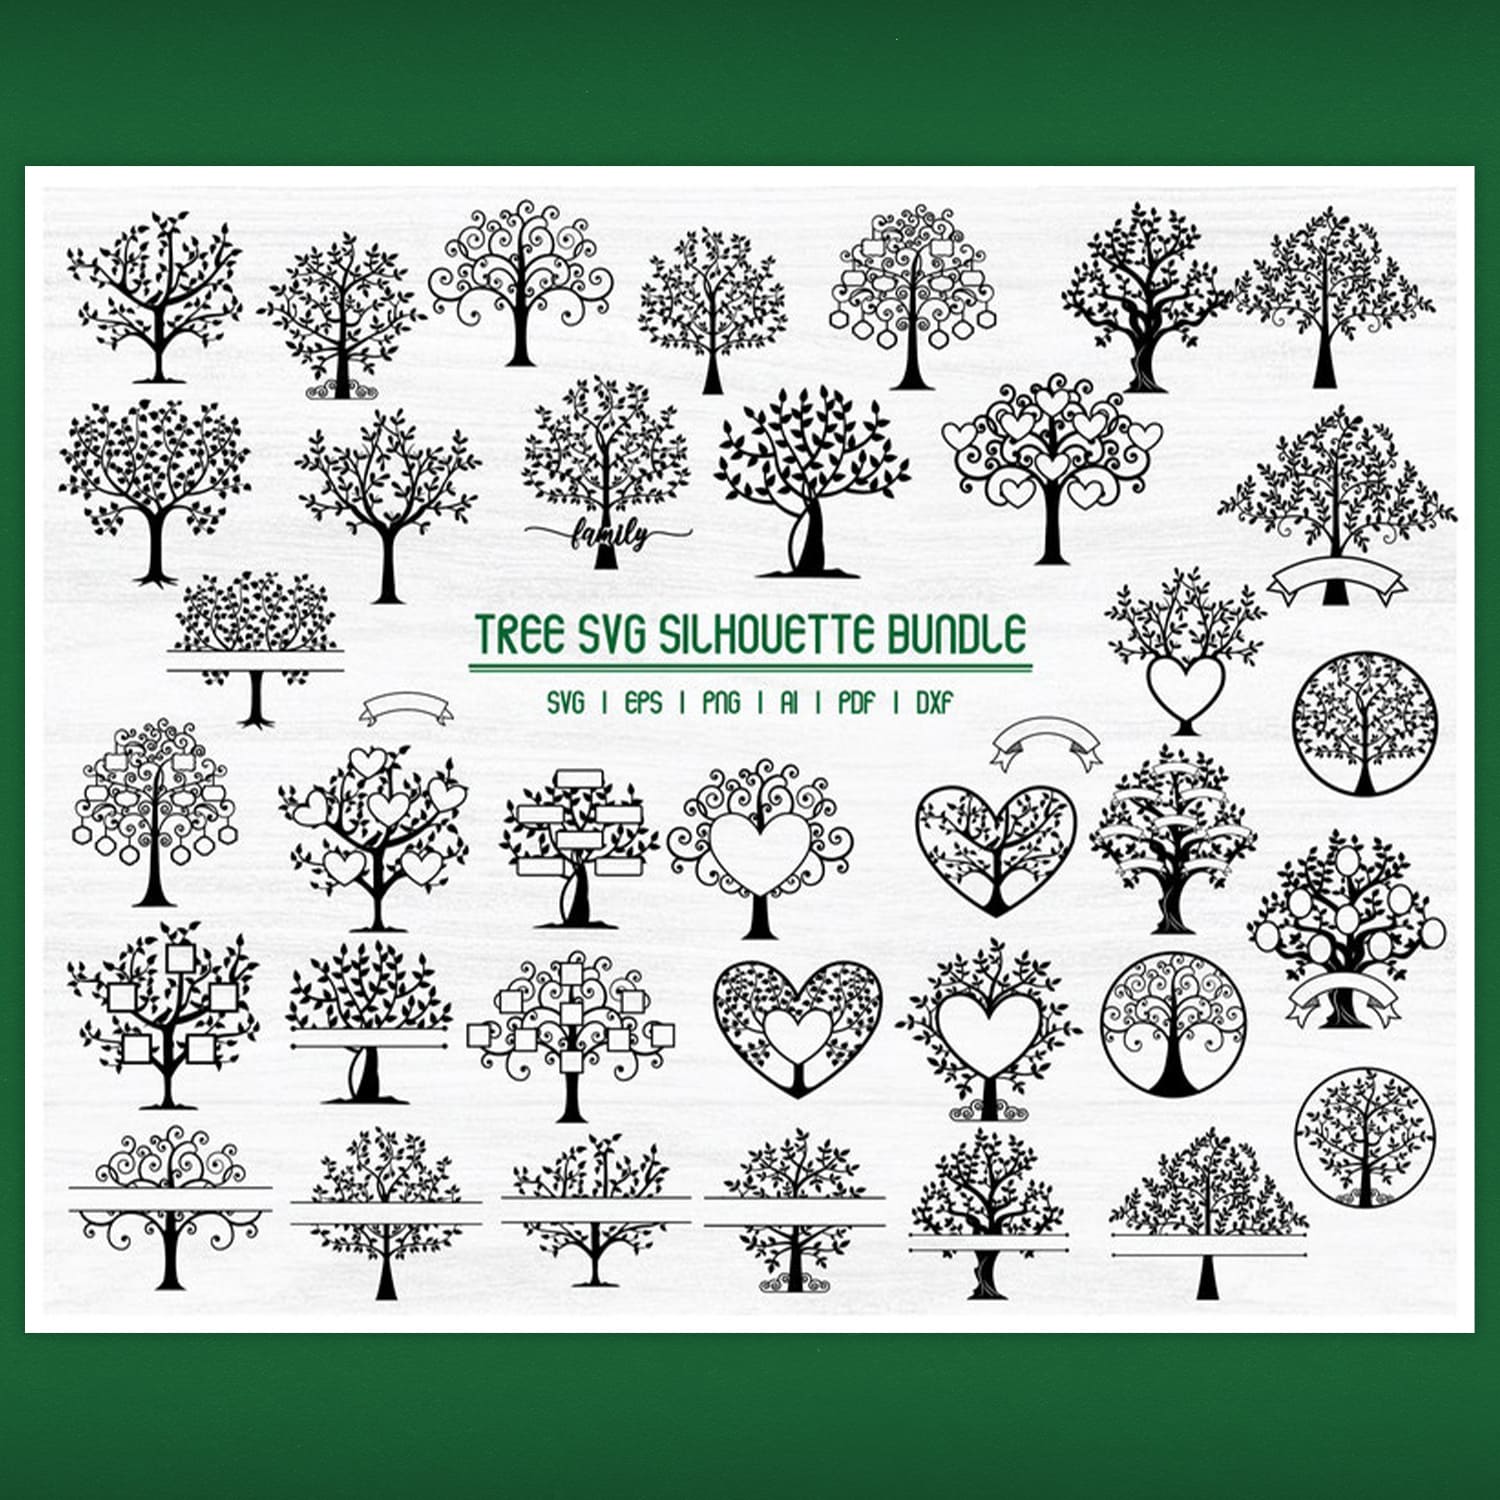 Great example of Tree SVG Bundle on green background.